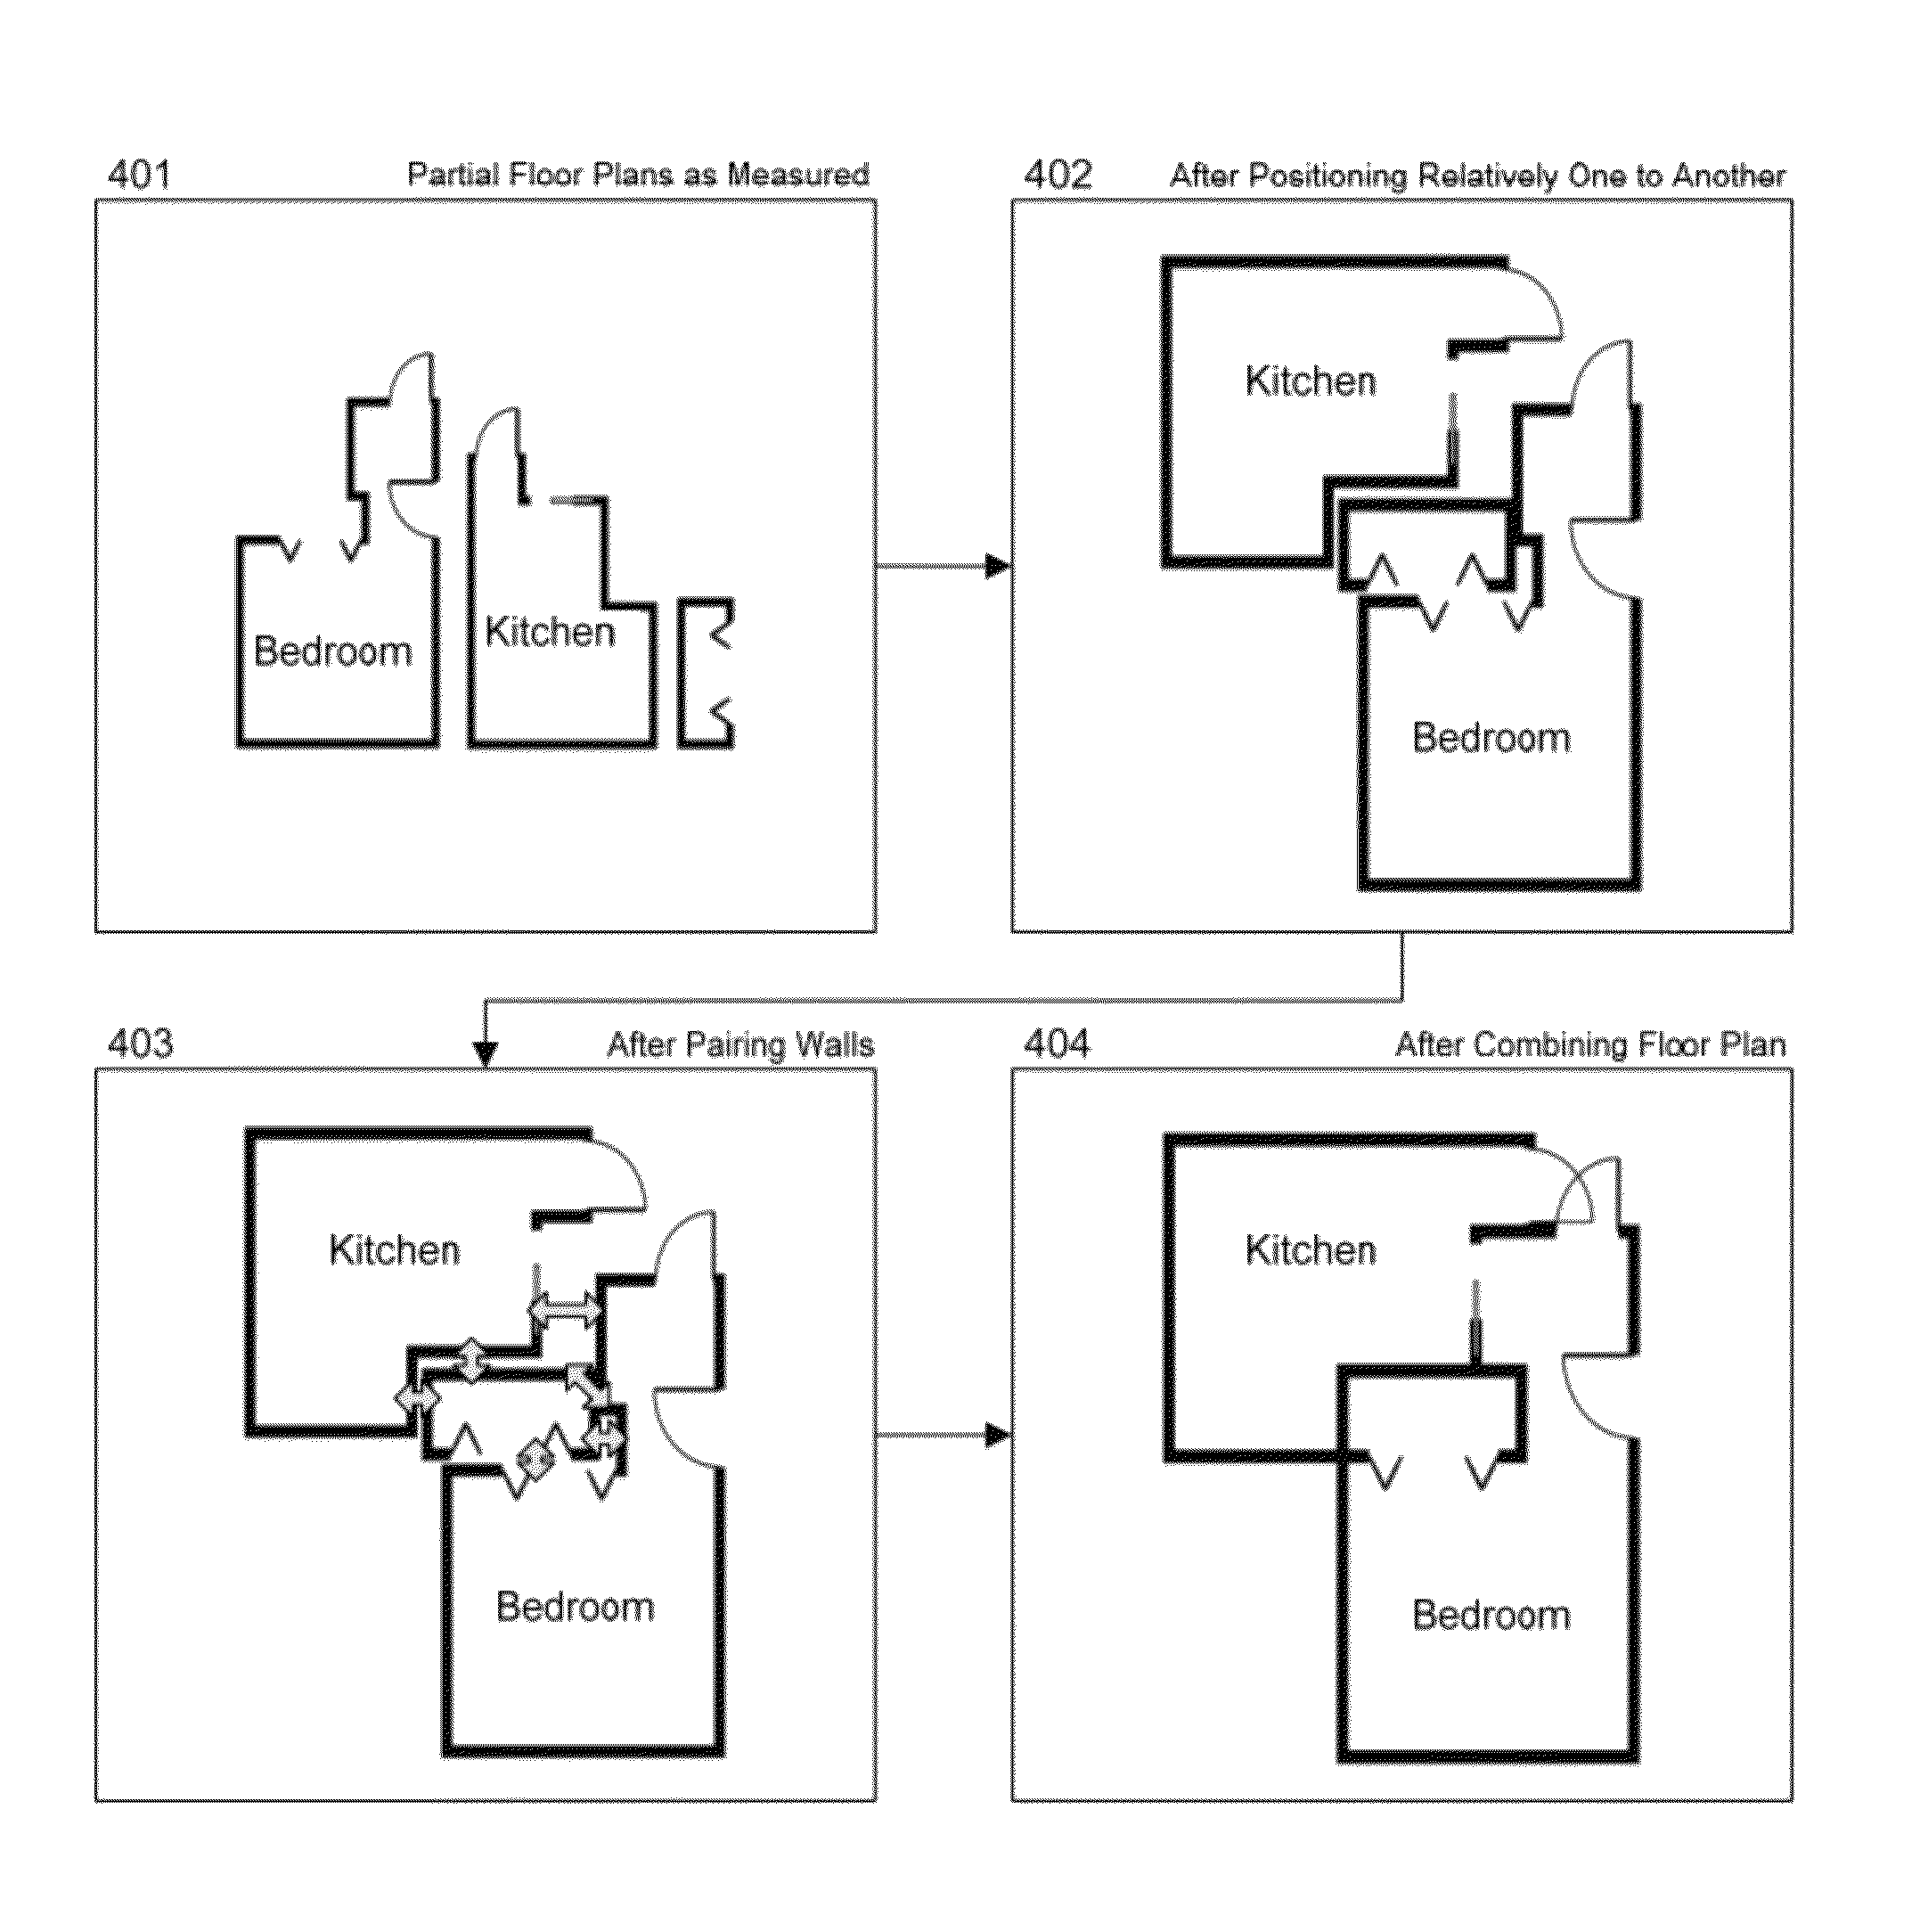 Method, tool, and device for assembling a plurality of partial floor plans into a combined floor plan